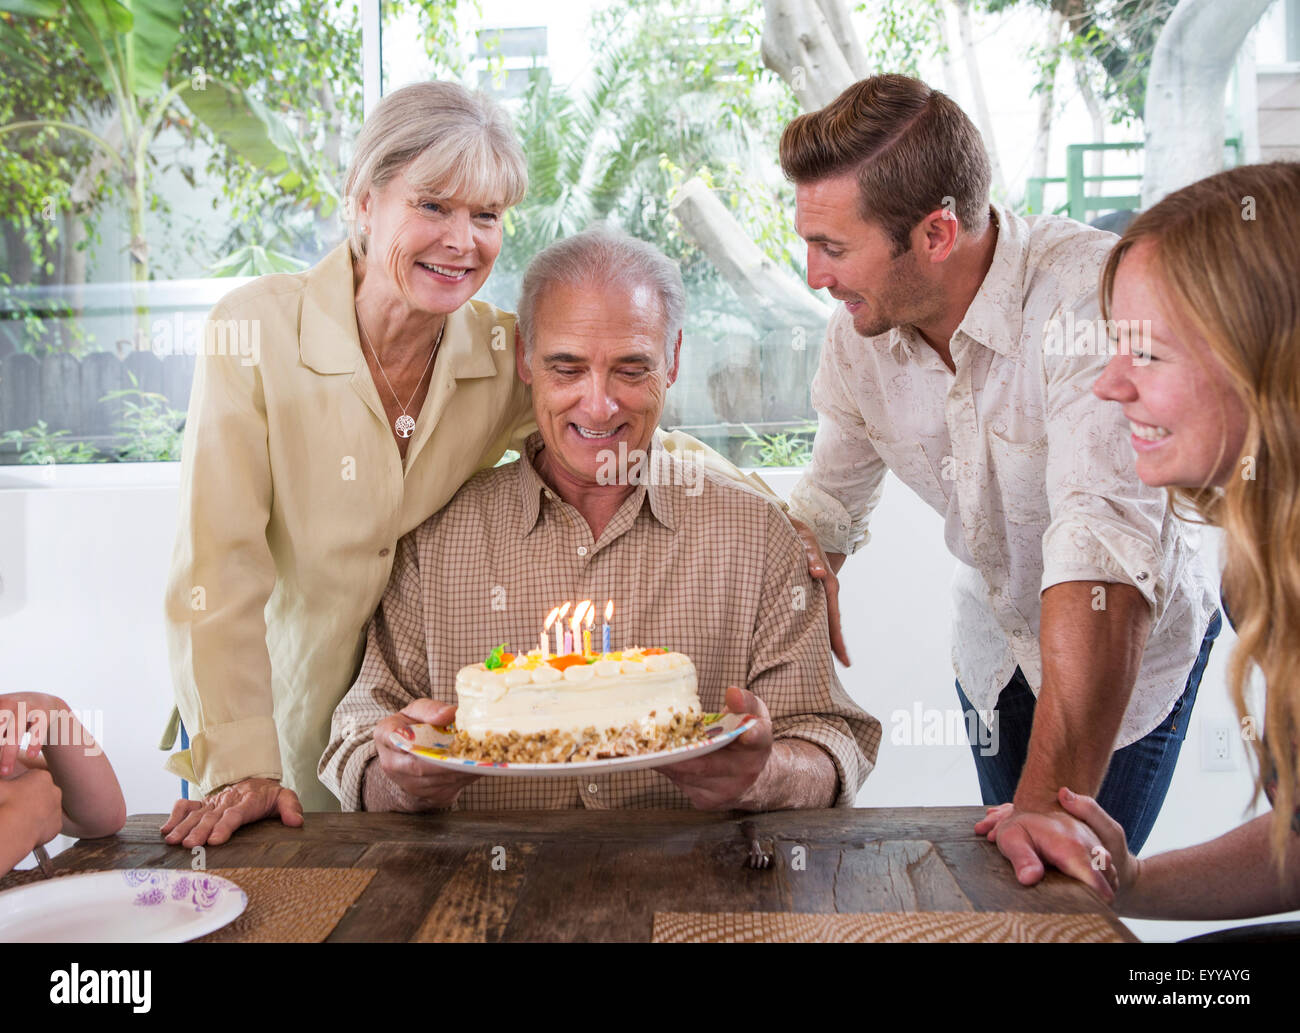 Caucasian family celebrating birthday at table Banque D'Images